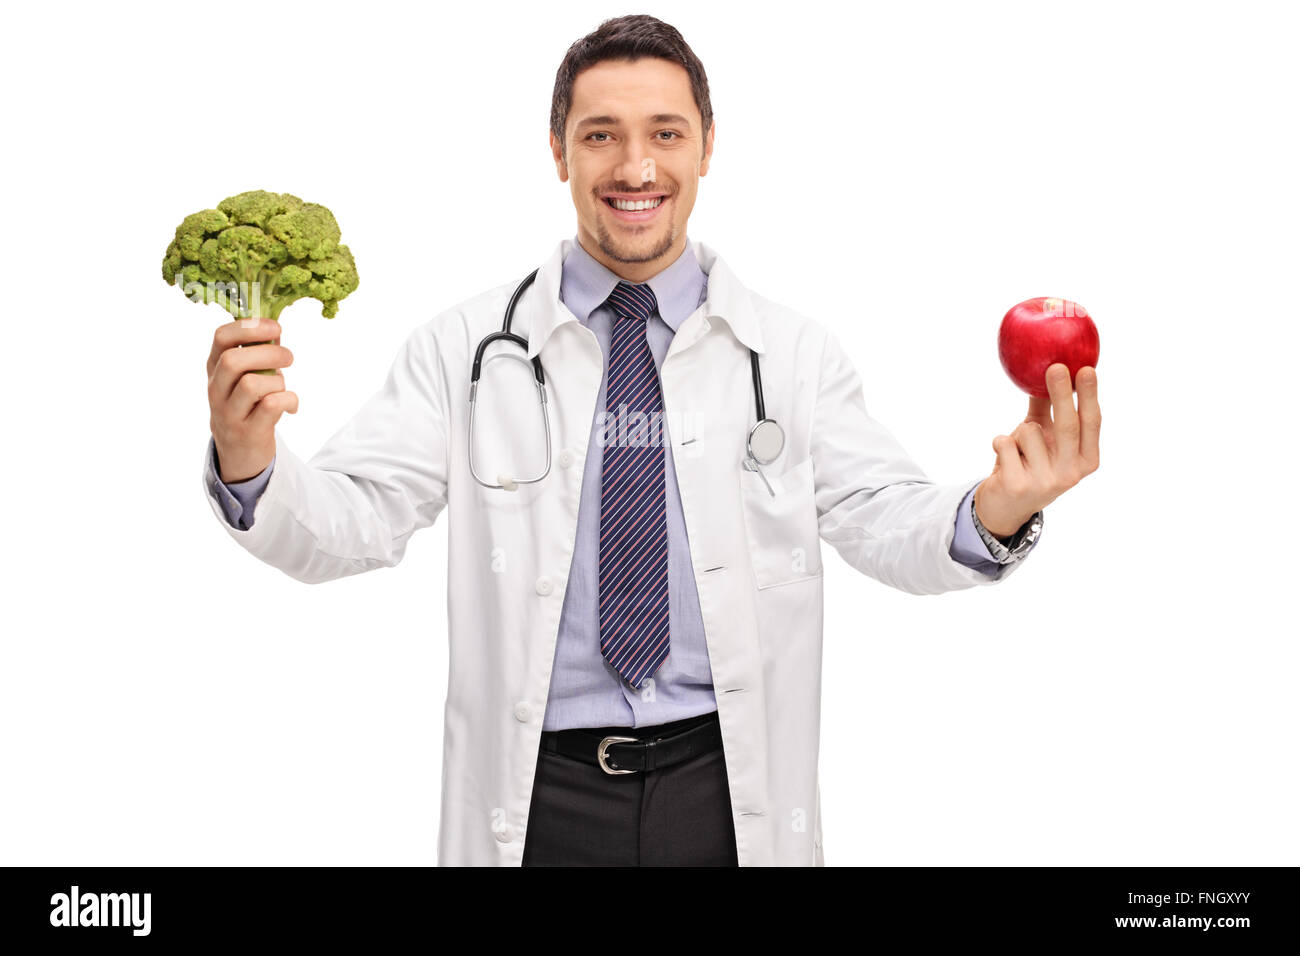 Young cheerful nutritionist holding a piece of broccoli and an apple isolated on white background Stock Photo